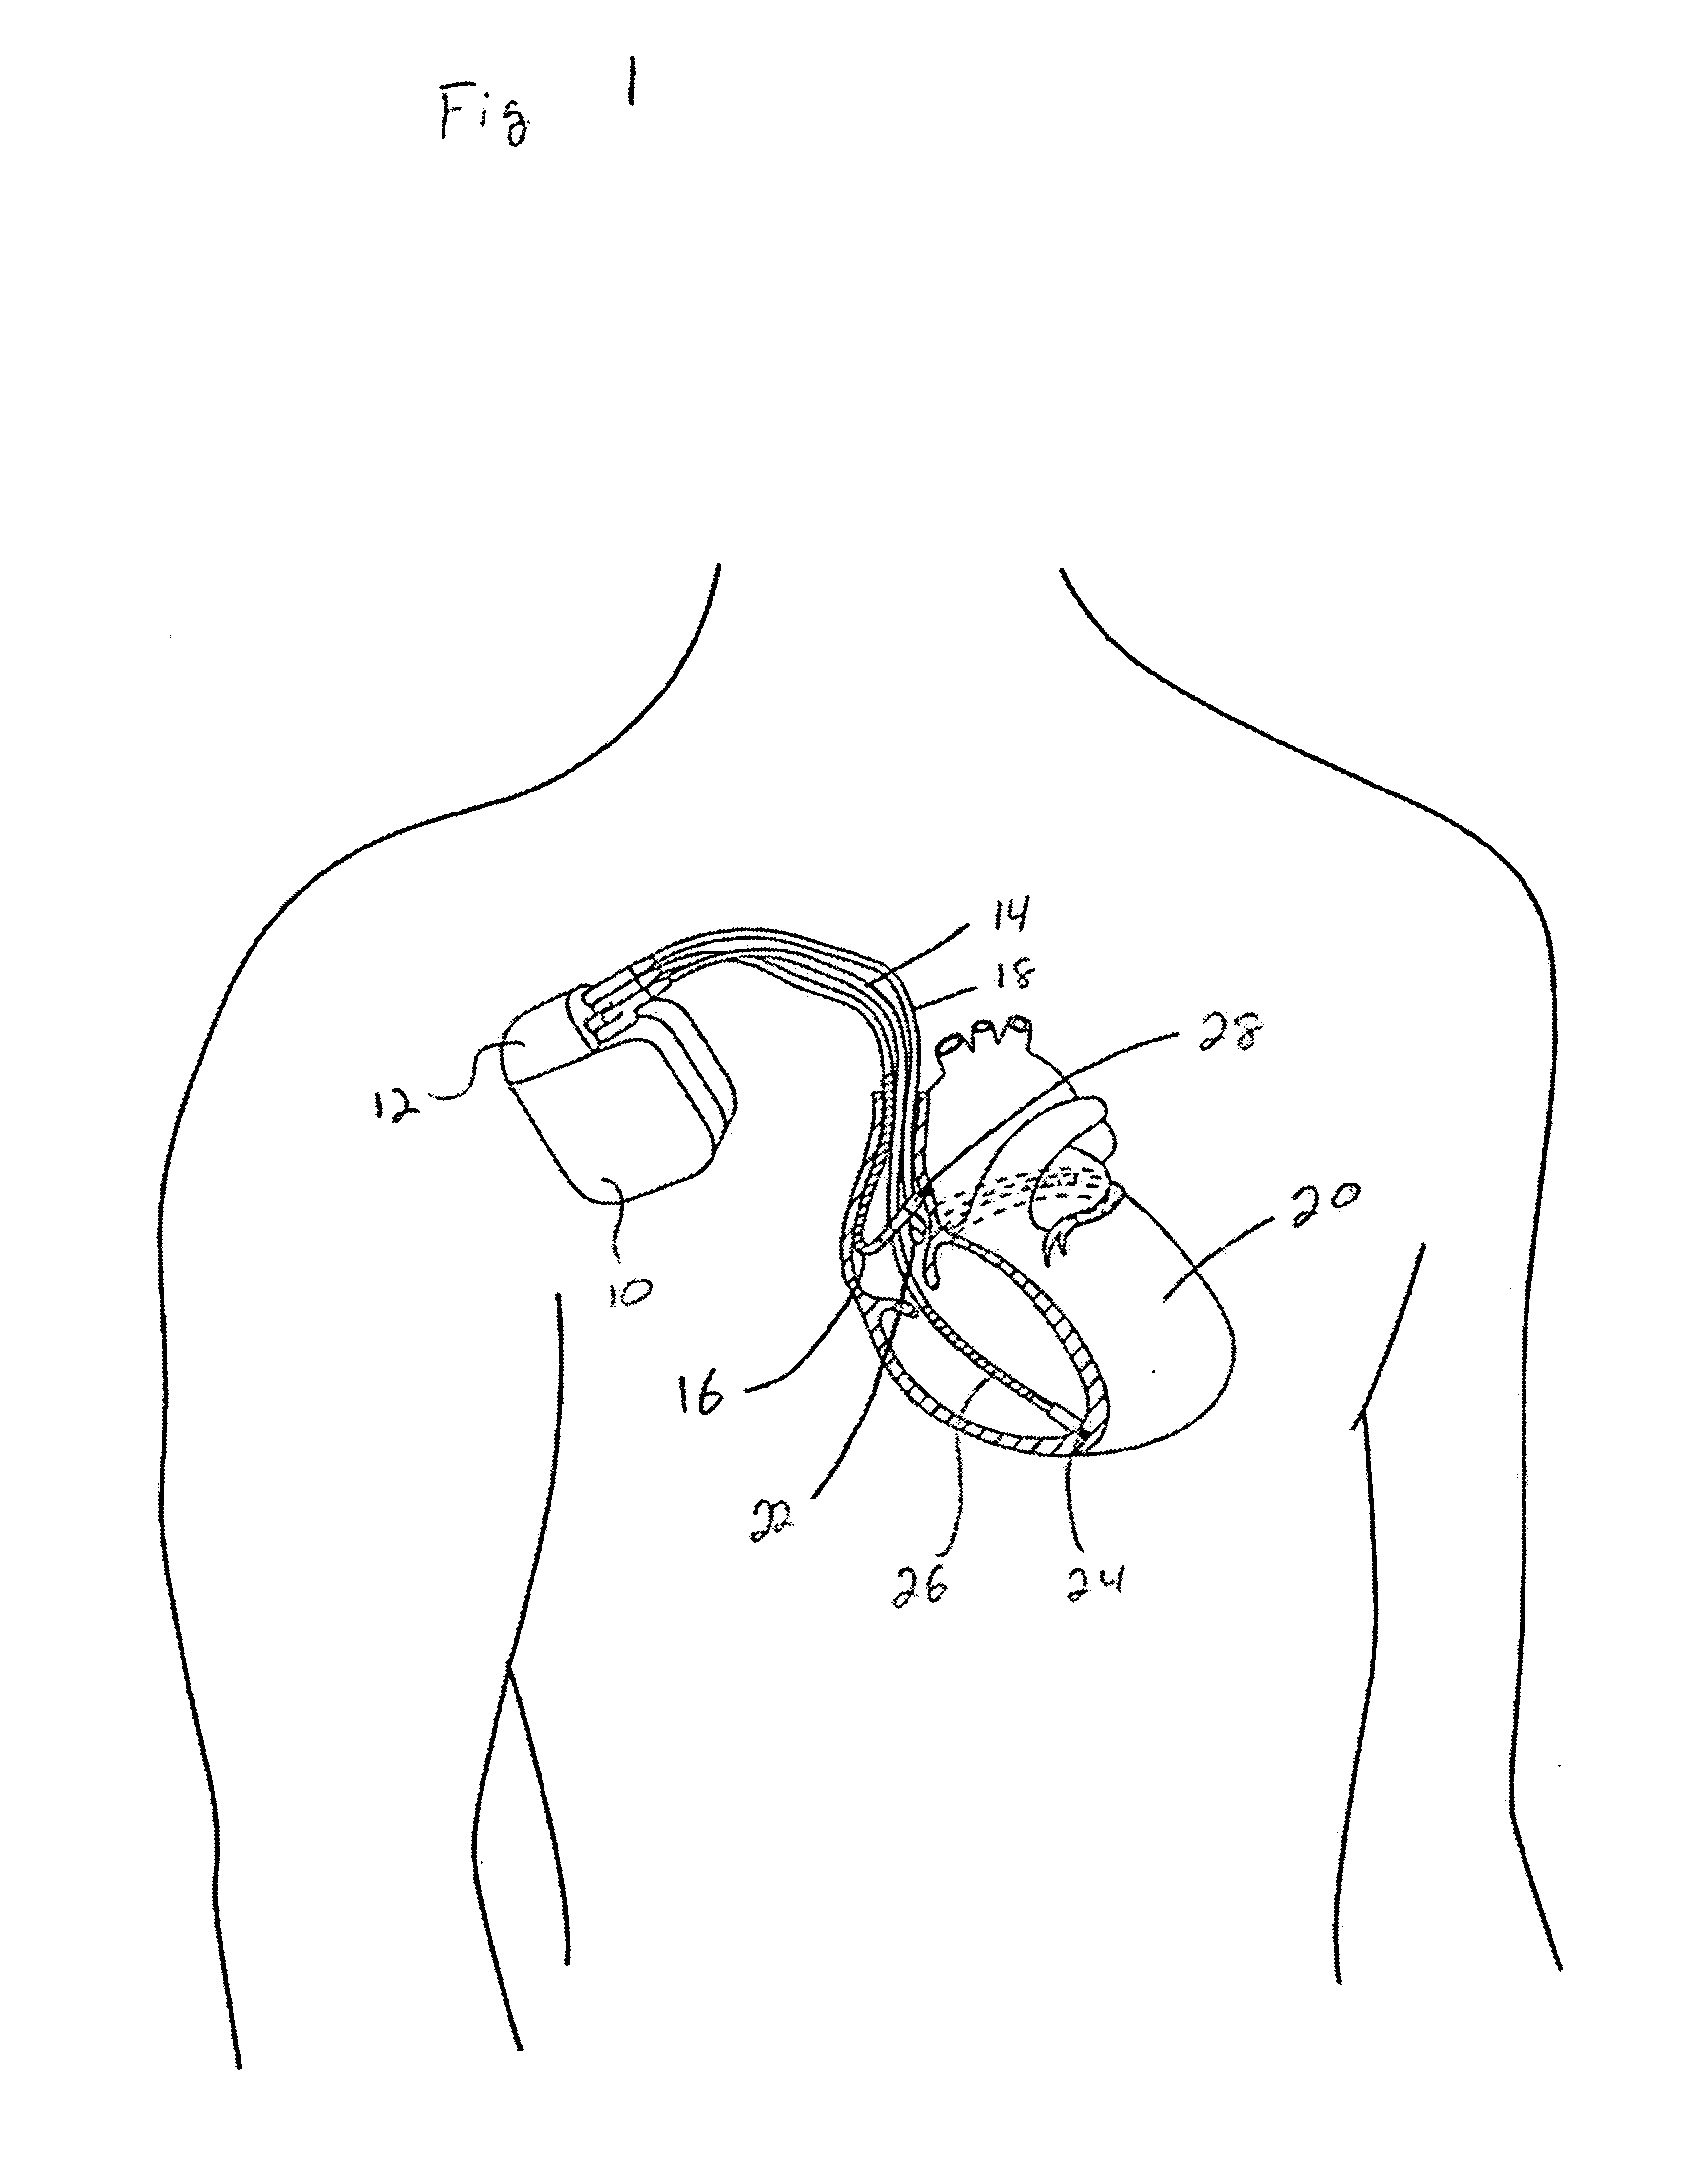 Trans-septal anchoring system and method